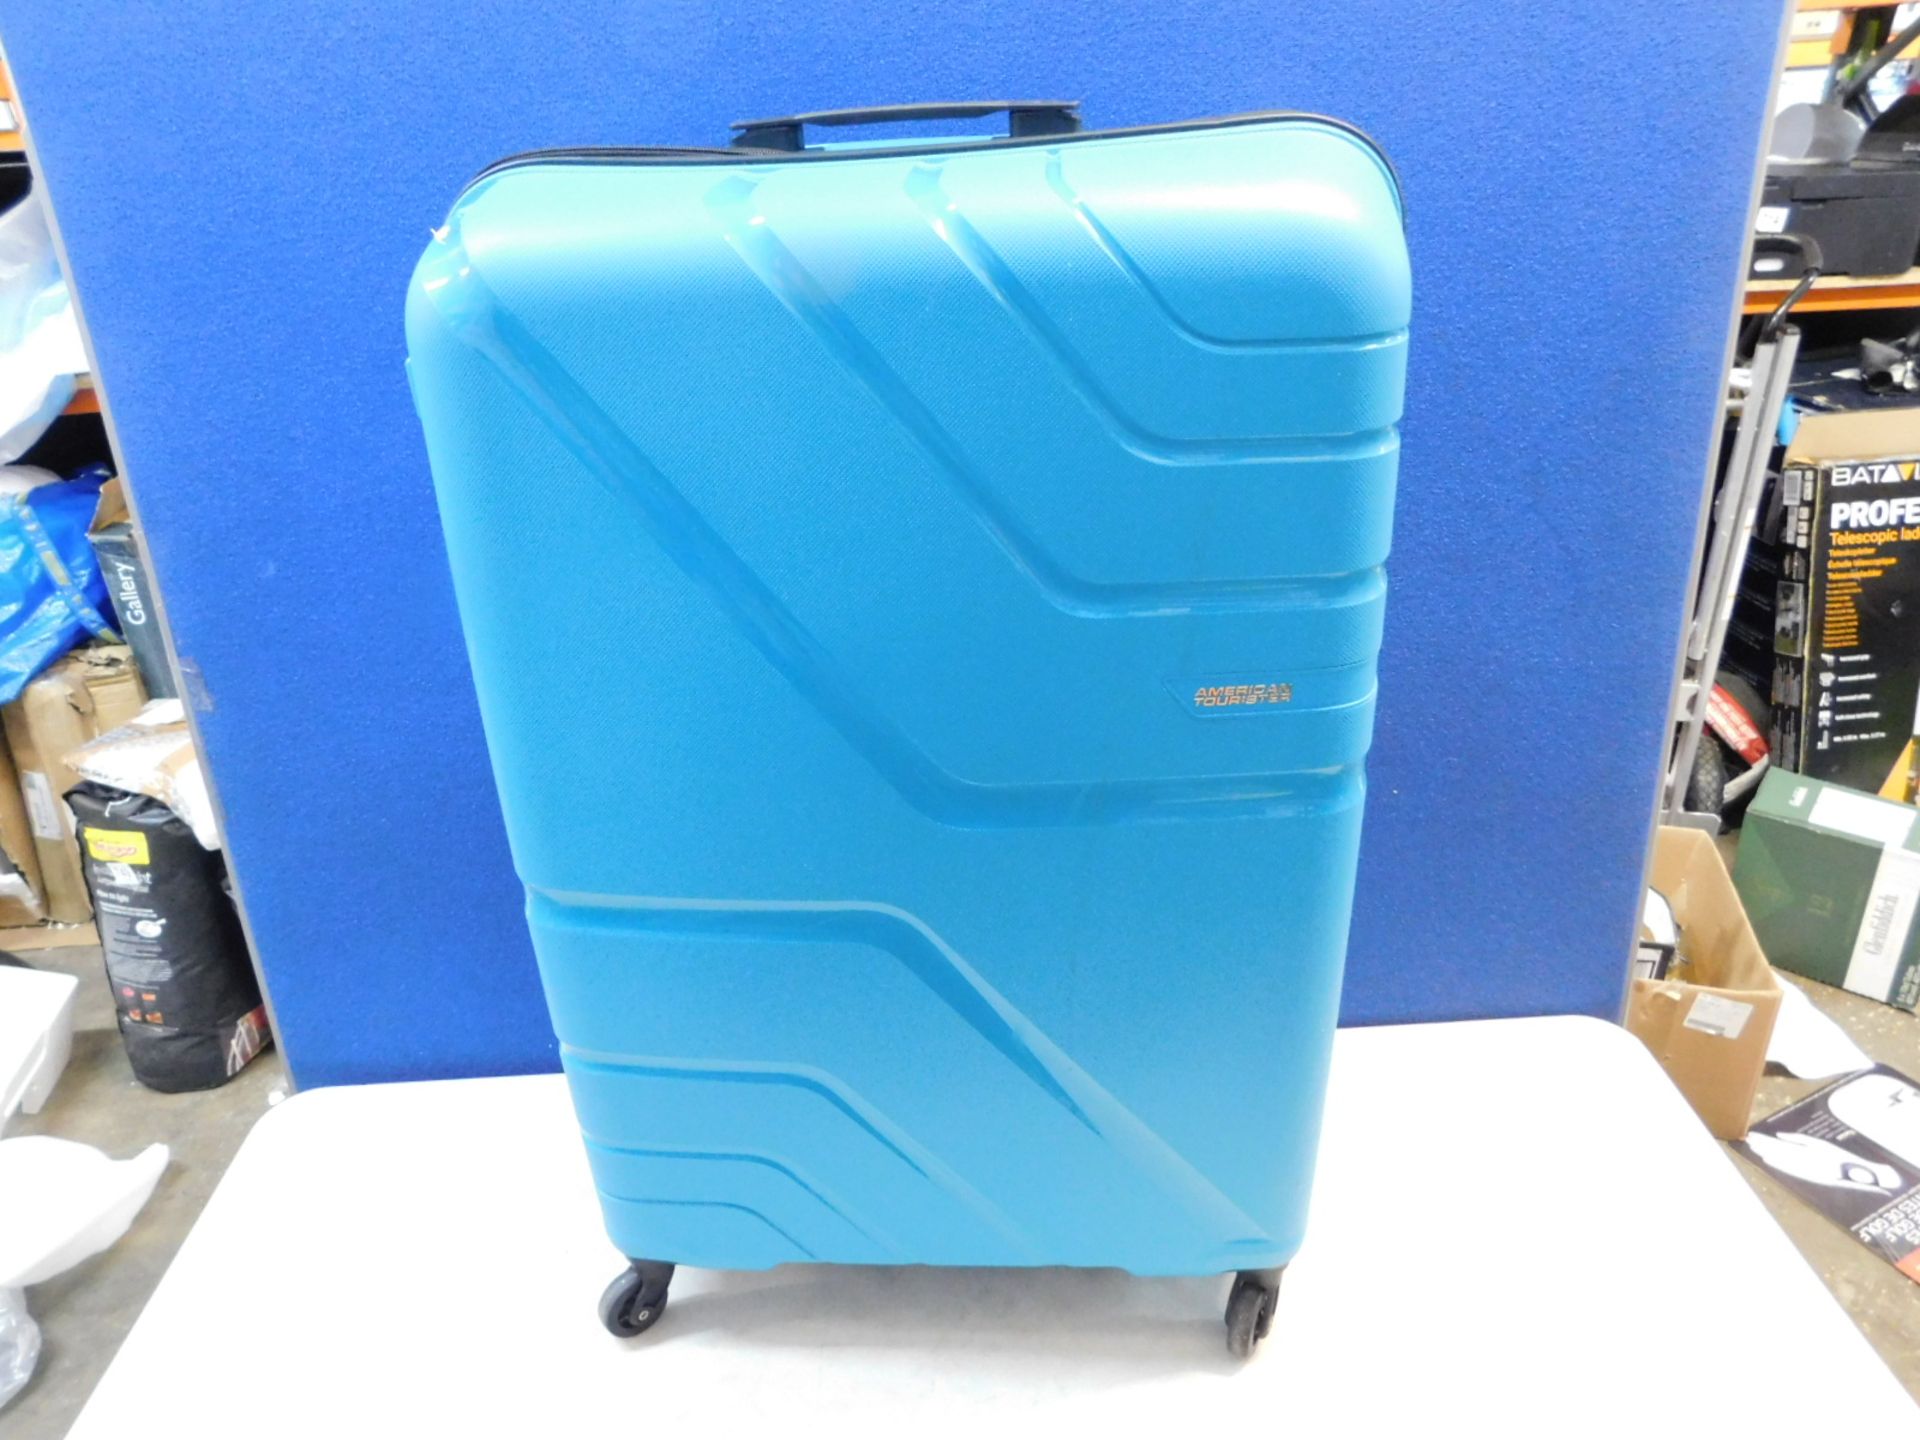 1 AMERICAN TOURISTER LIGHT BLUE HARDSIDE PROTECTION LARGE LUGGAGE RRP Â£99